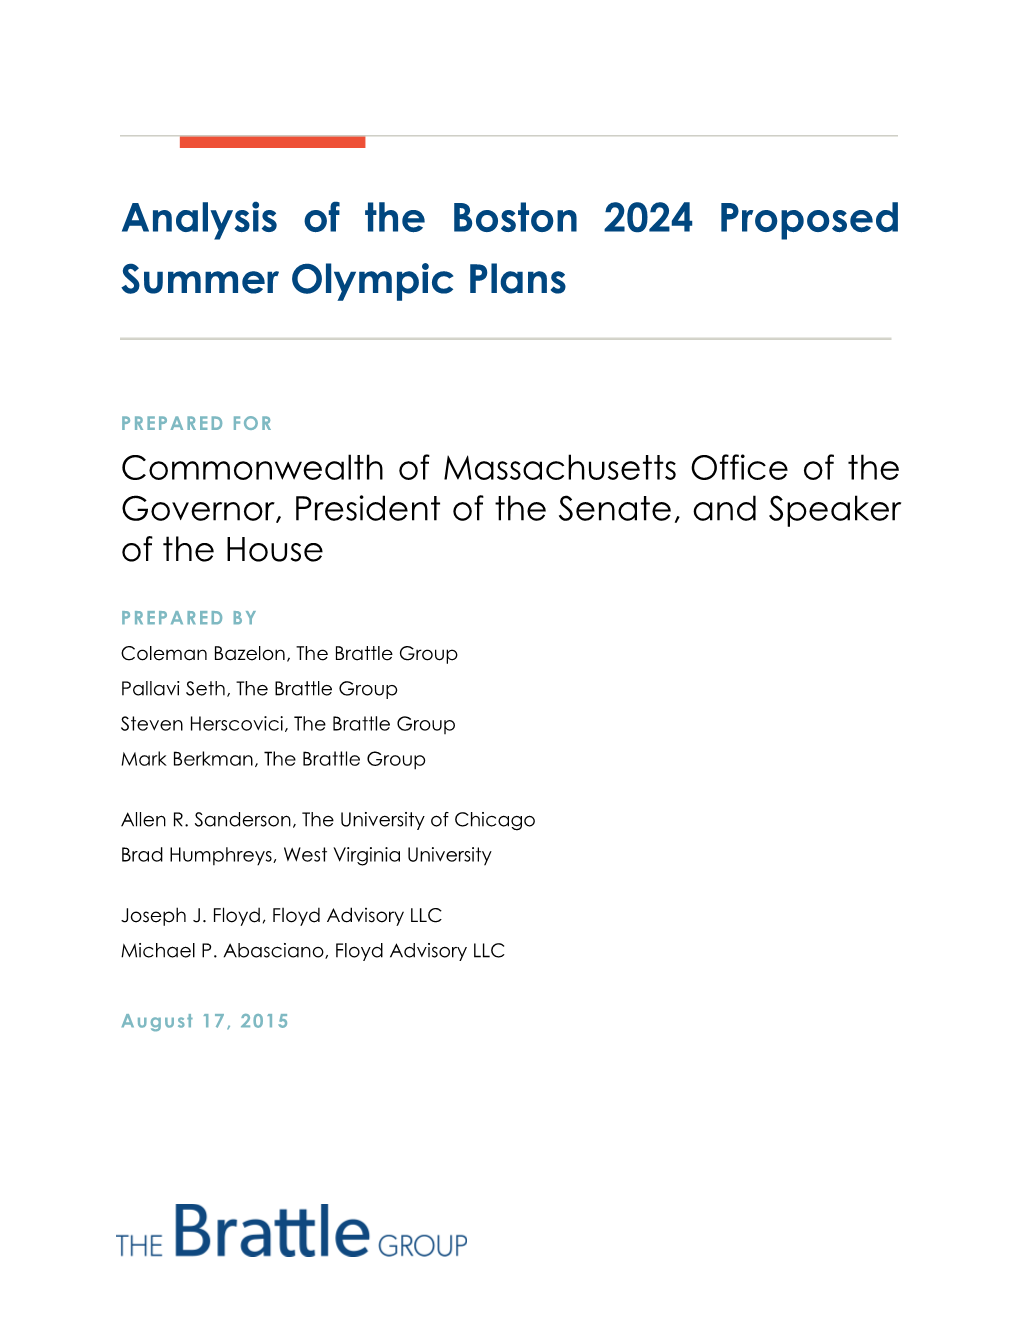 Analysis of the Boston 2024 Proposed Summer Olympic Plans